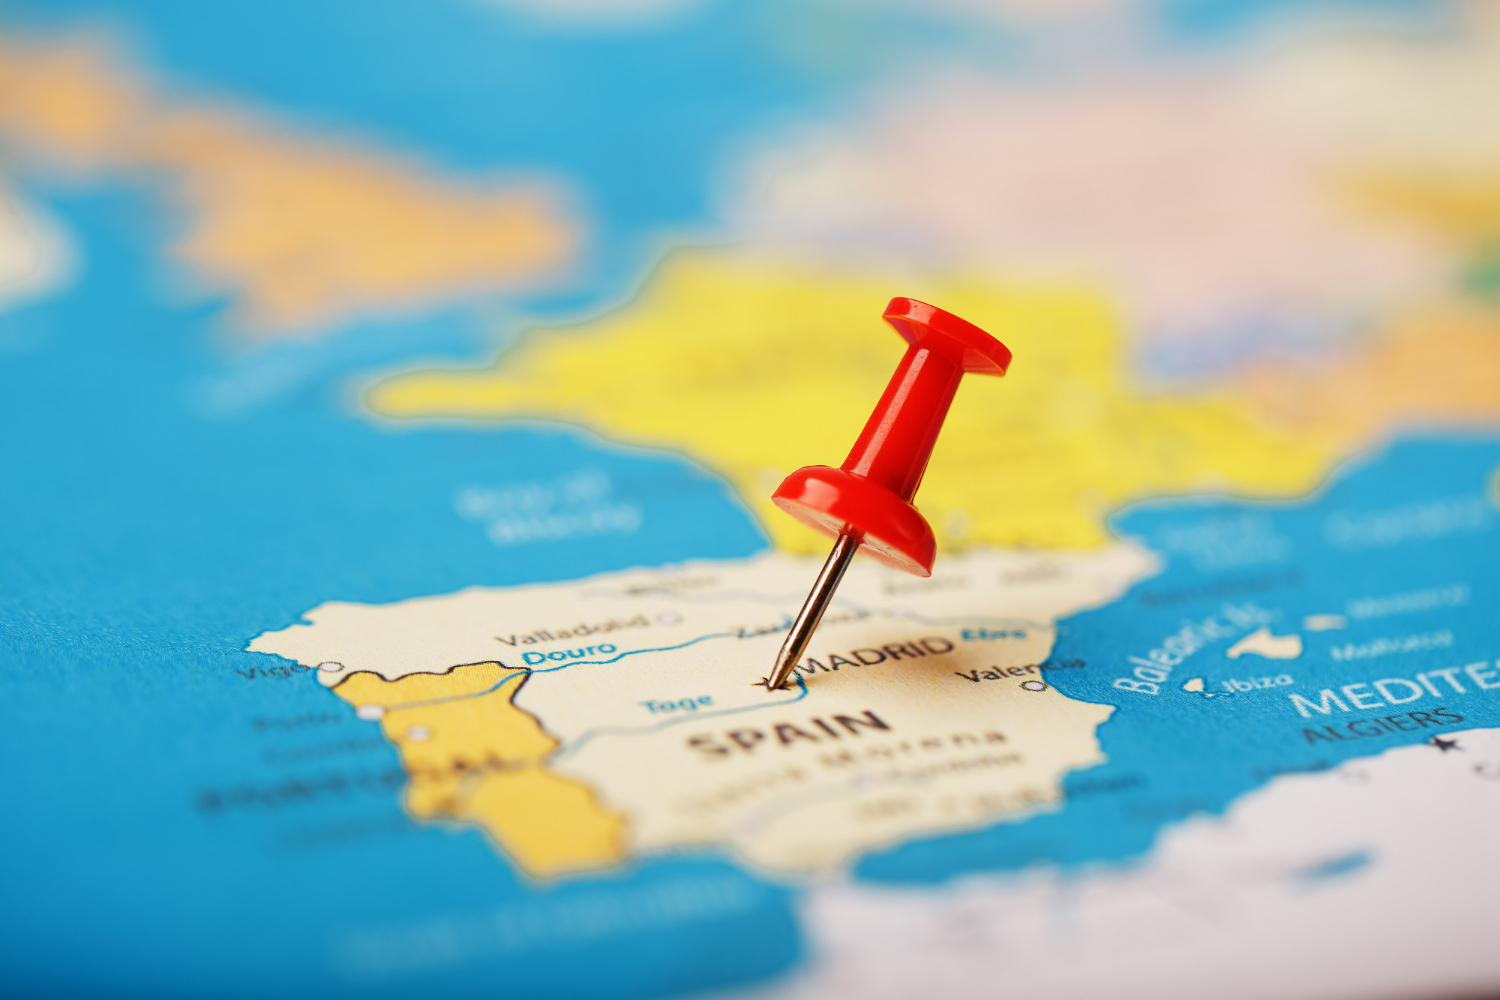 the-location-of-the-destination-on-the-map-of-spain-is-indicated-by-red-pushpin-spain-marked-on-the-map-with-red-button